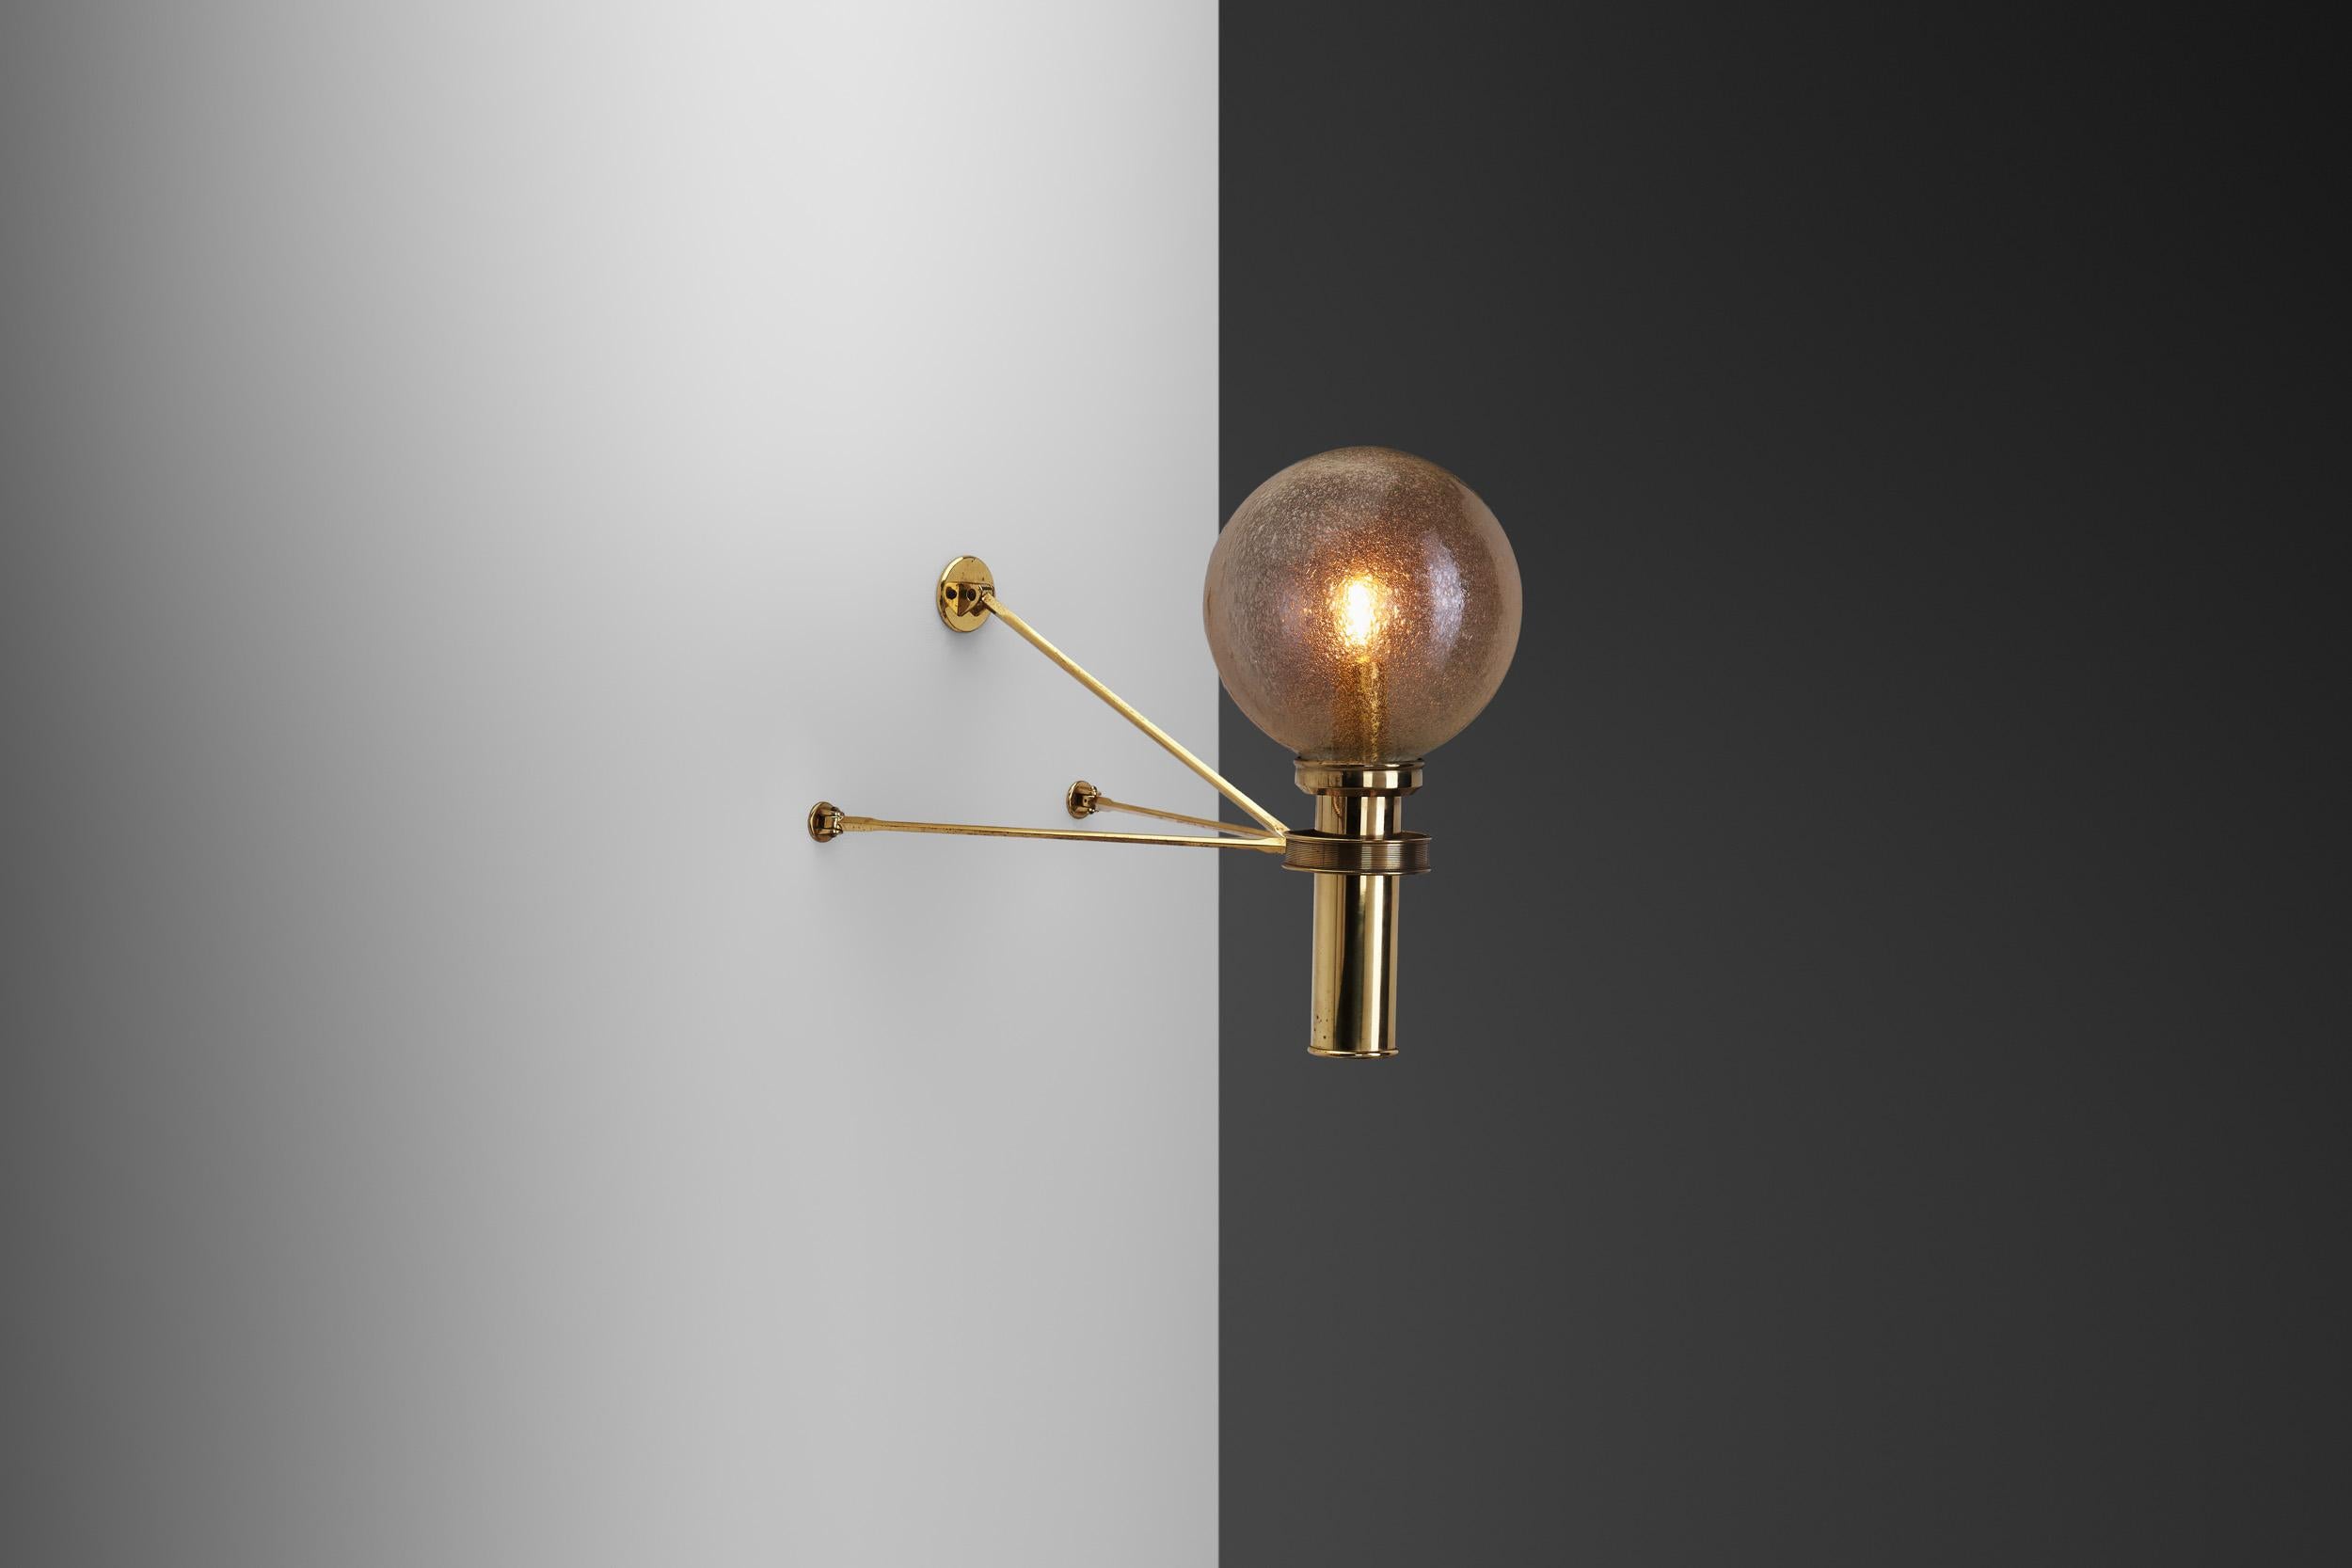 The best qualities of European mid-century designers’ light fixtures are most often their atmospheric light, disciplined, functionalist design completed by unique solutions and design elements. Exemplified by this wall lamp, these qualities are not